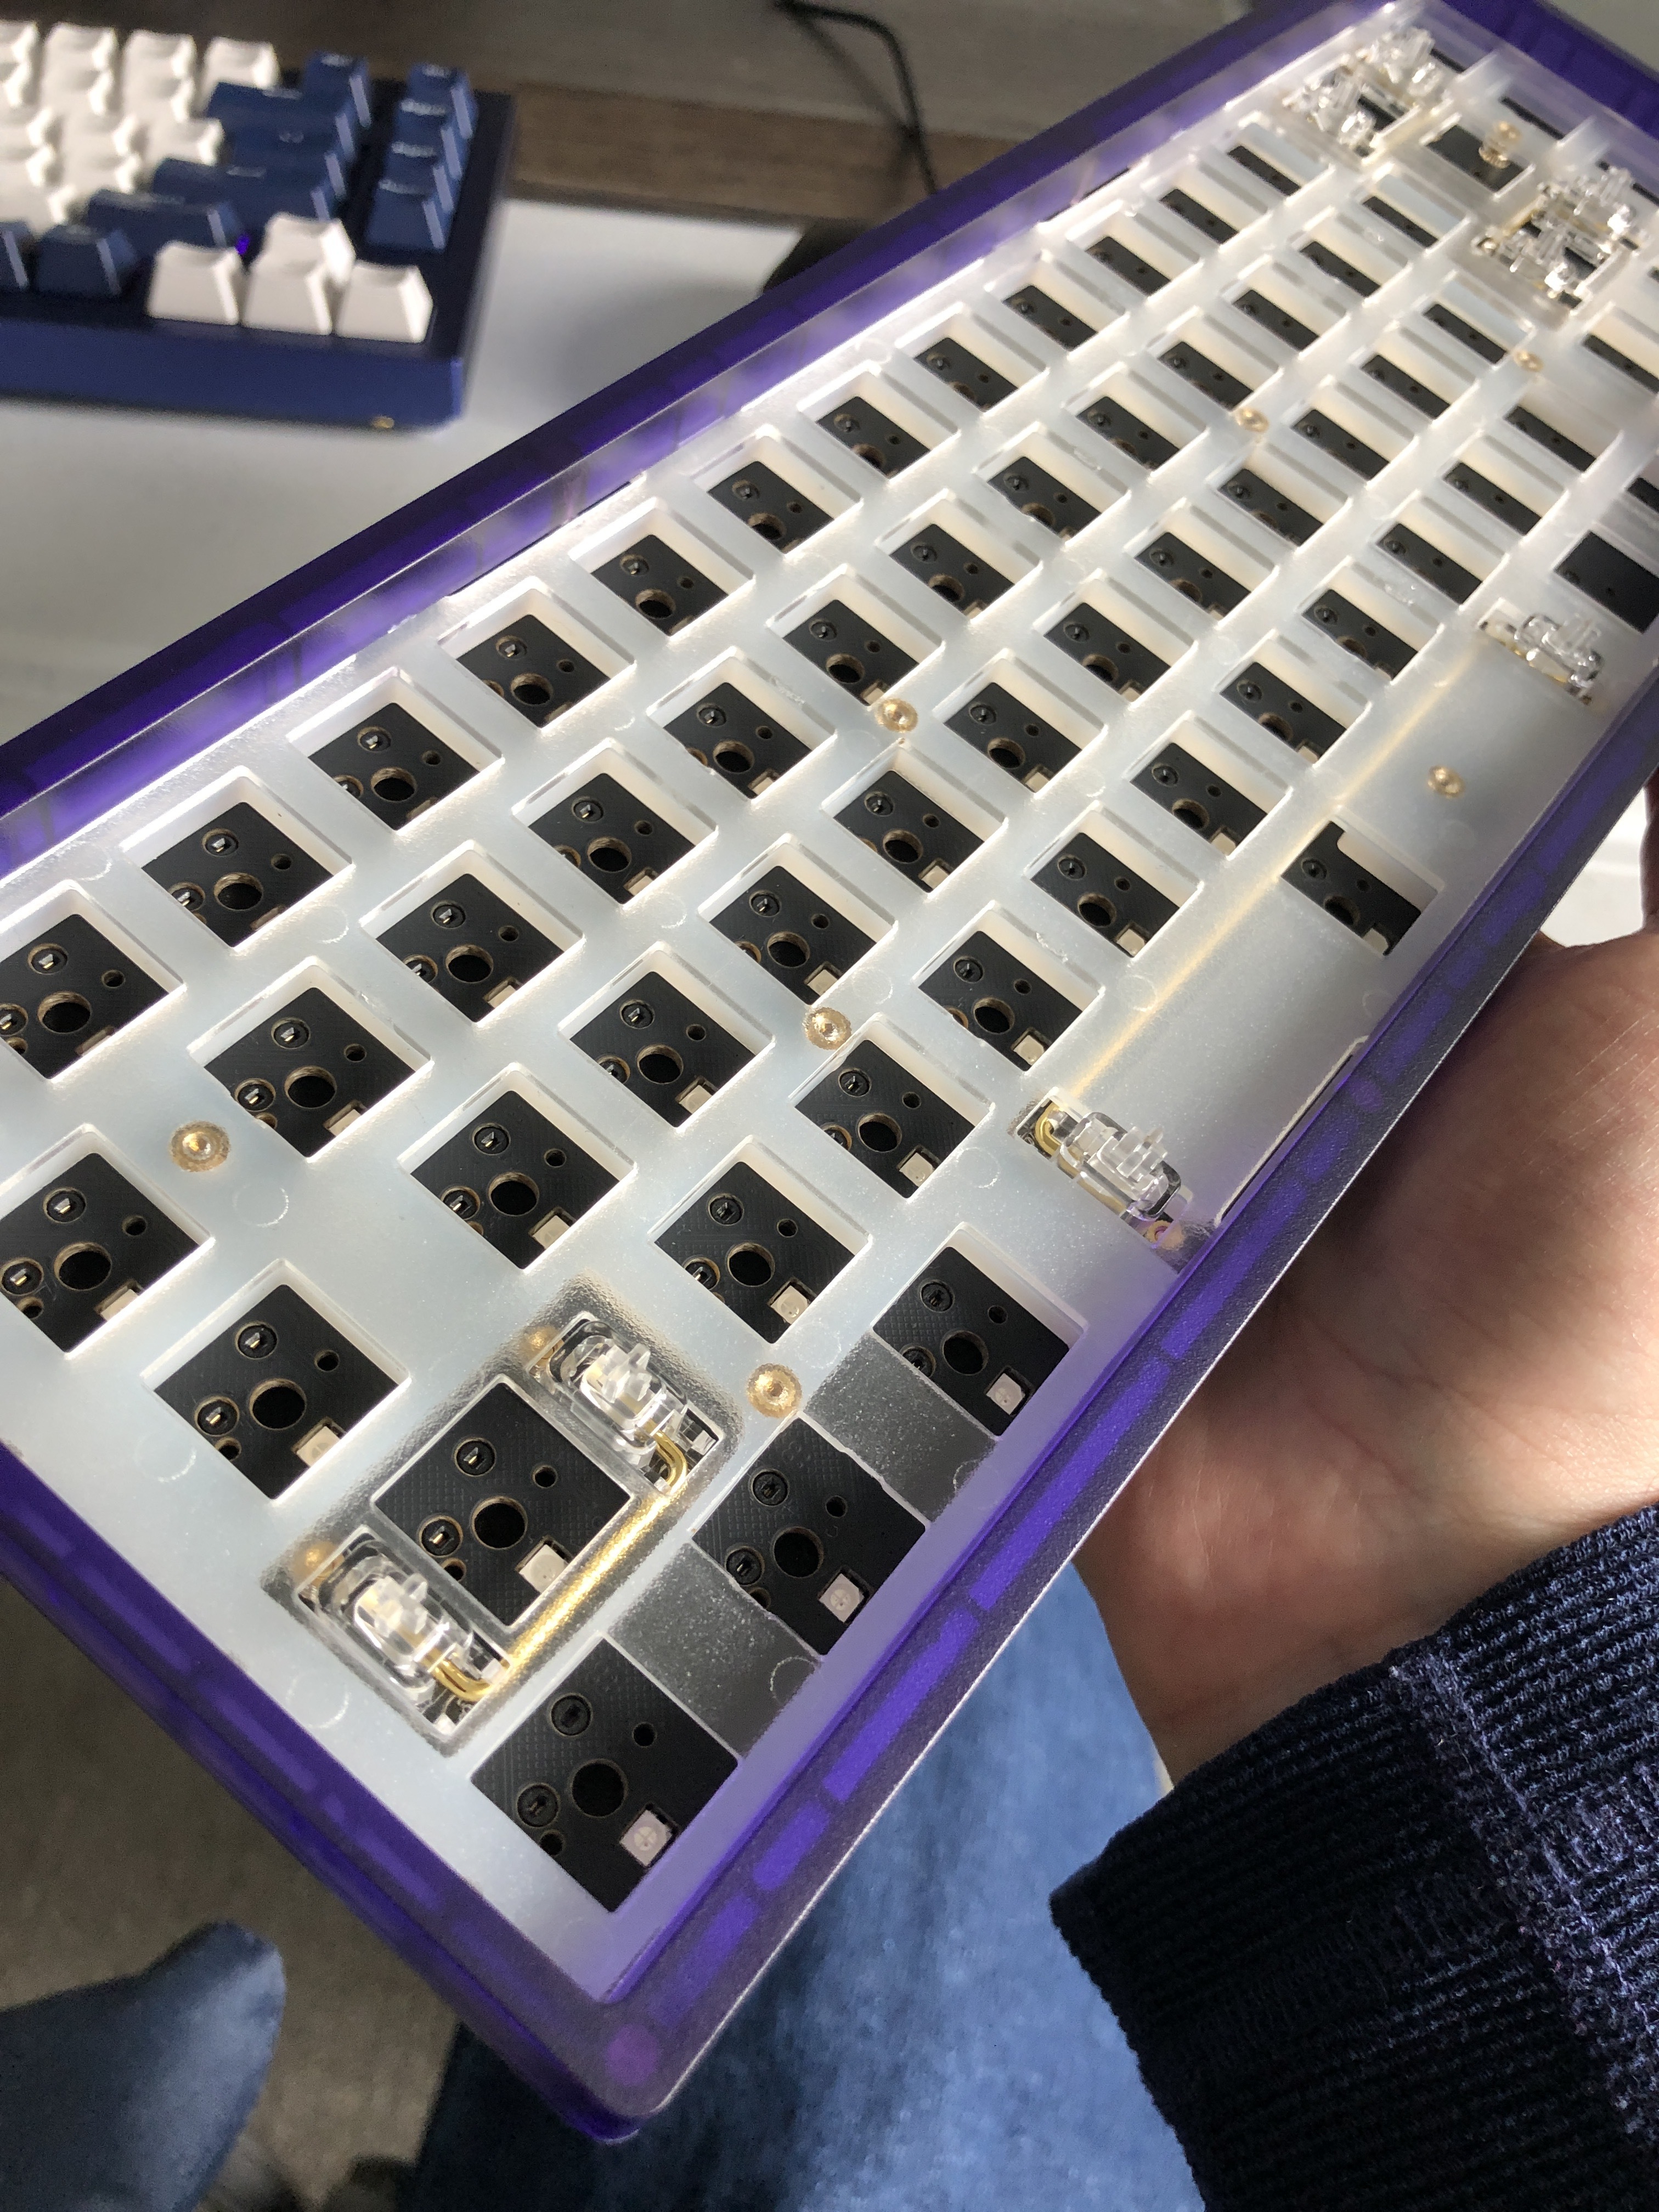 A blue plastic keyboard case without switches or caps installed, showing the bare switch sockets, held in my hand 